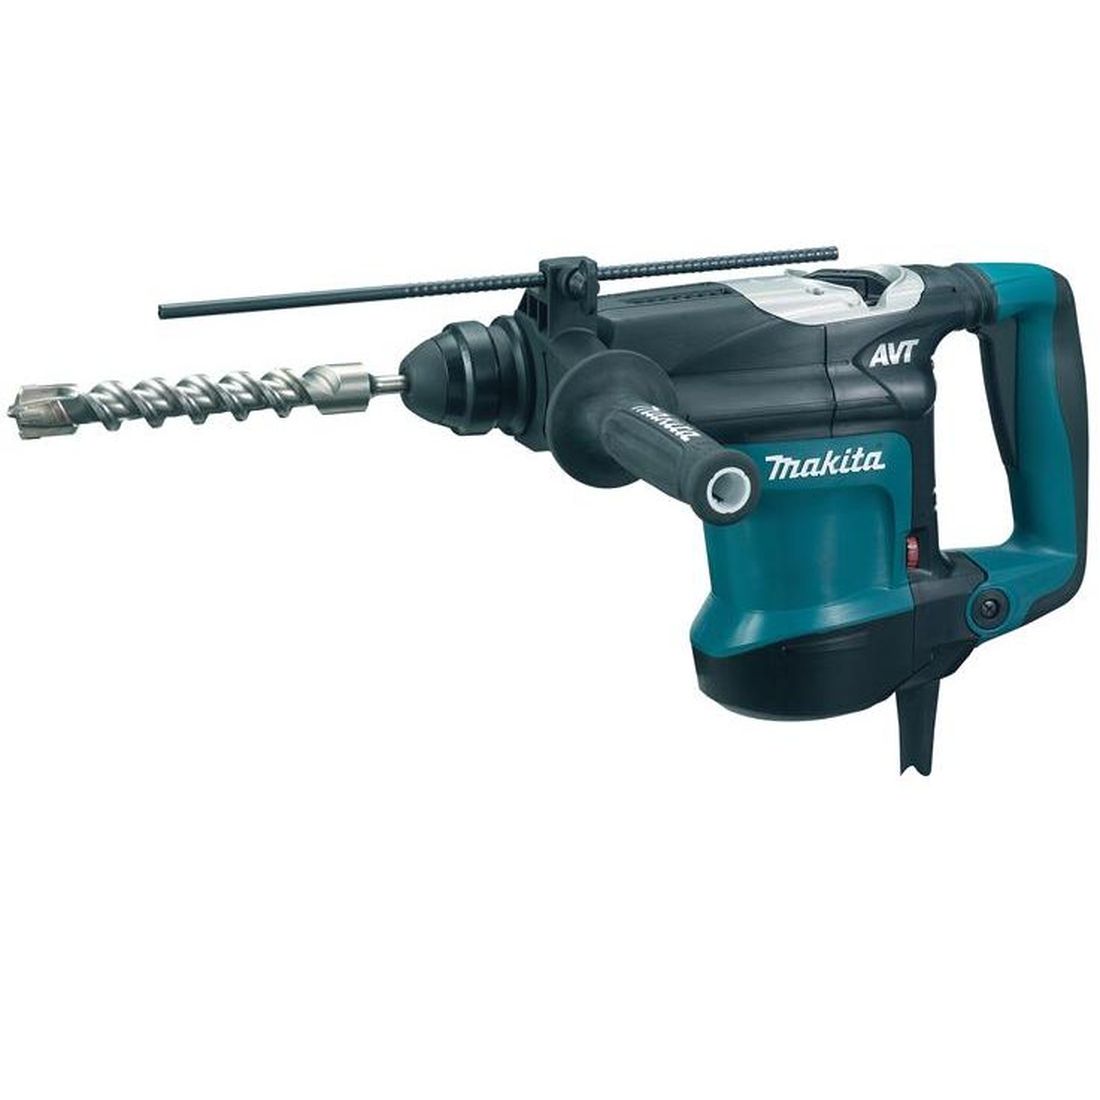 Makita HR3210FCT SDS Plus Rotary Hammer Drill with QC Chuck 850W 110V                  